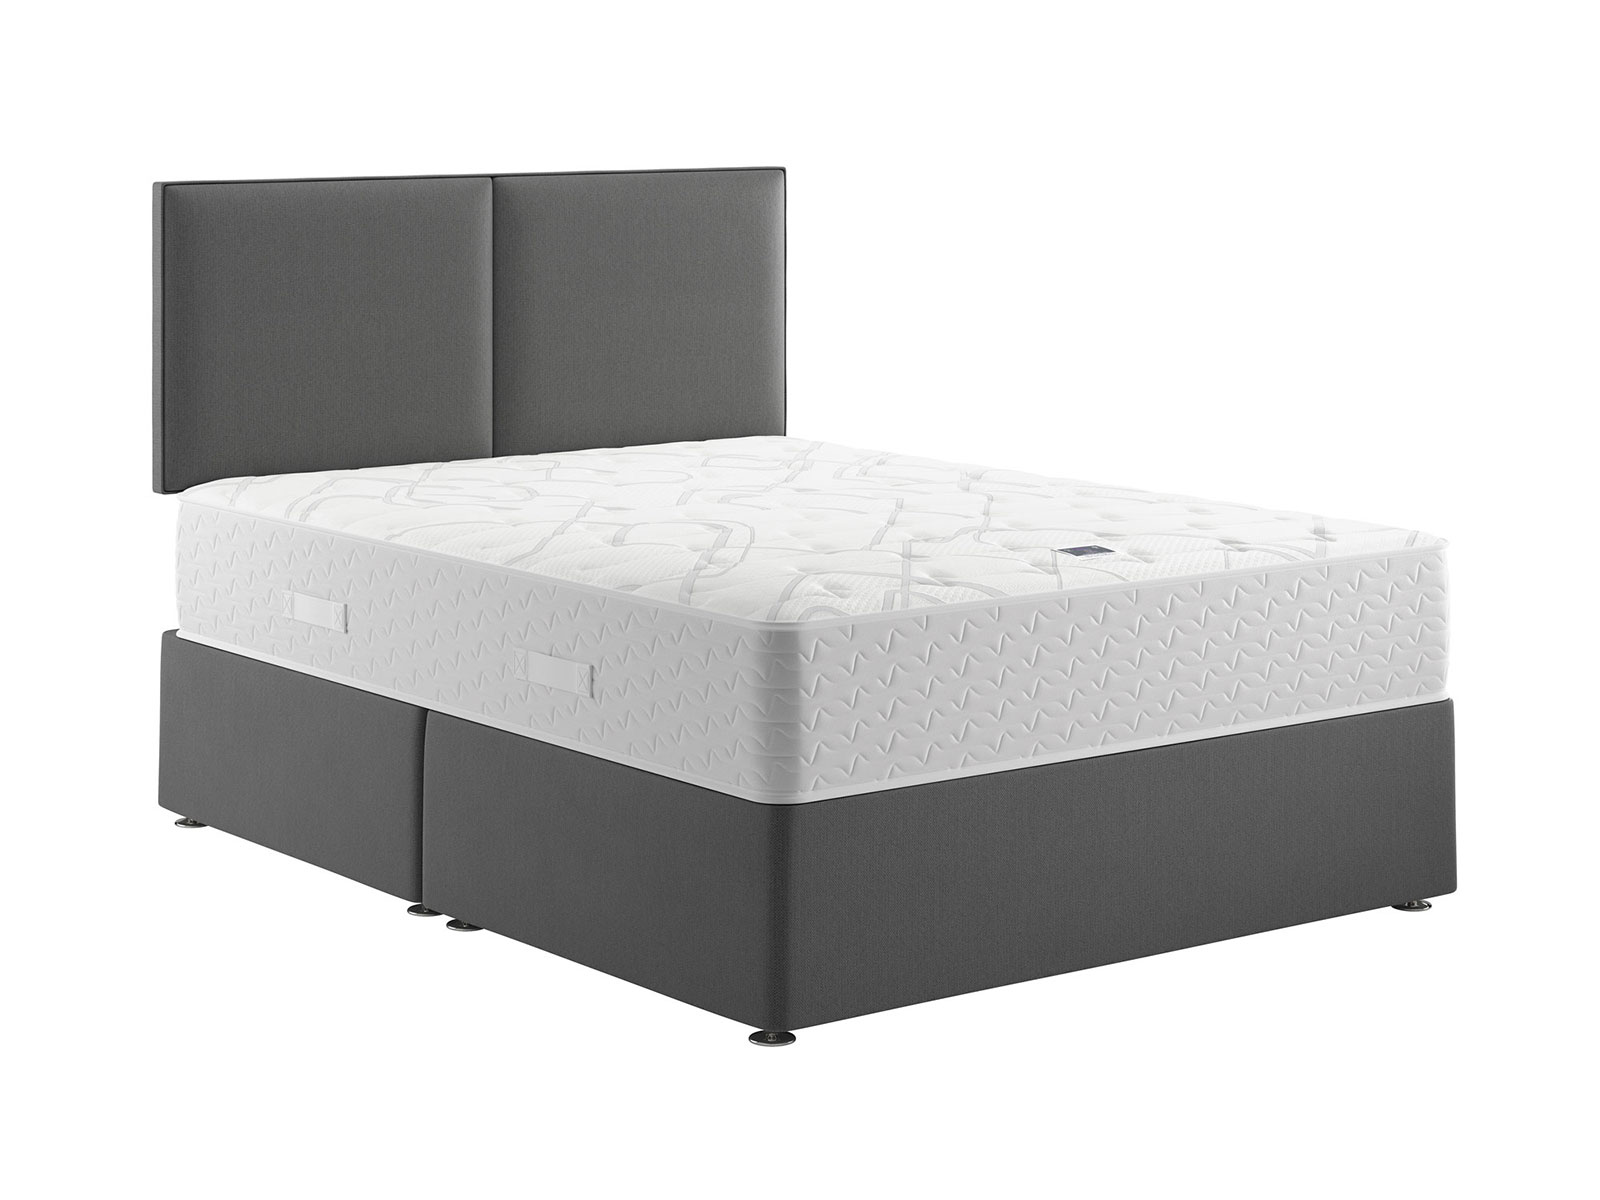 5ft King SIze Relyon Contemporary Comfort 1000 Mattress